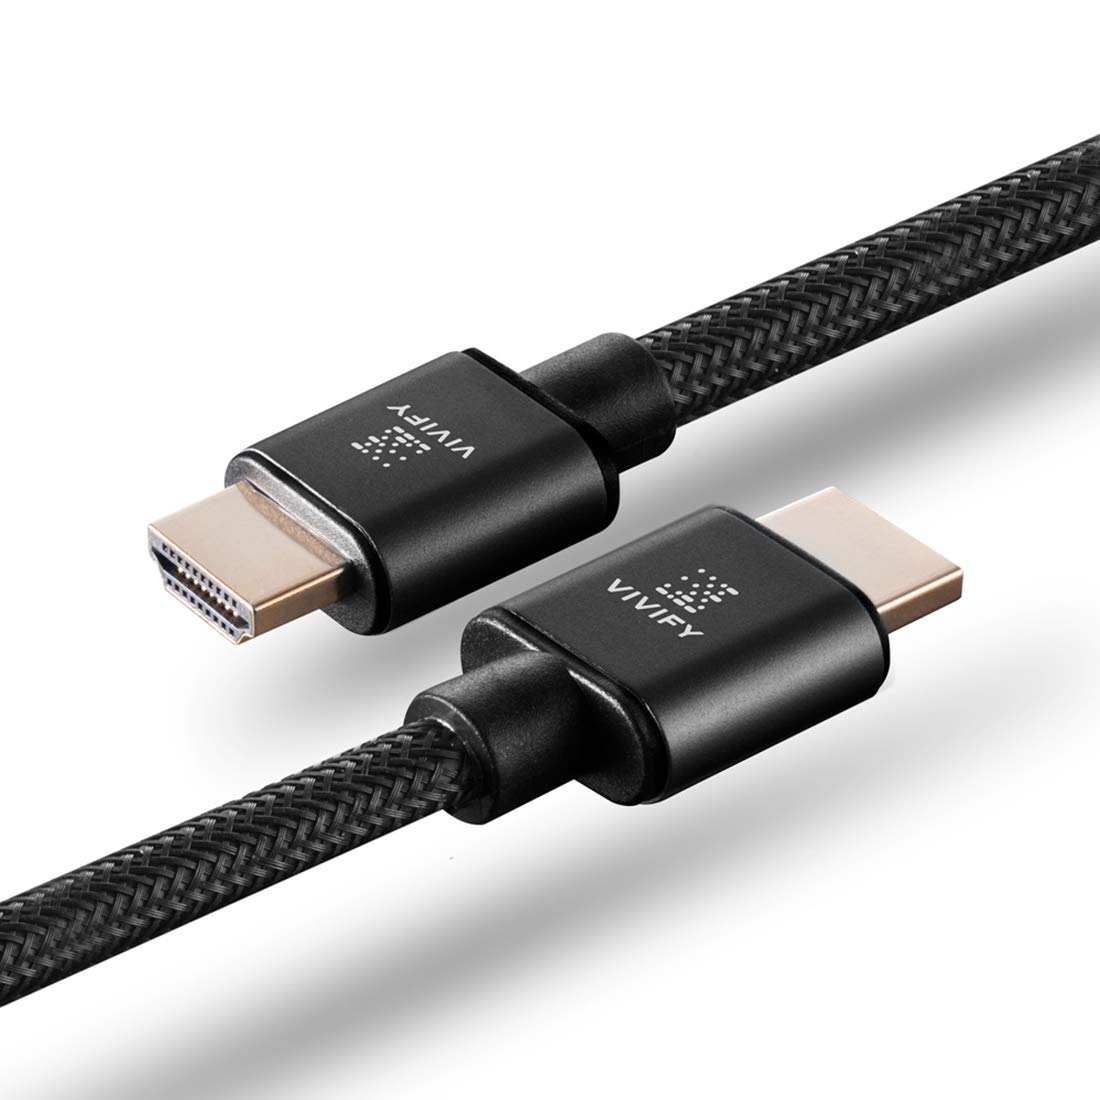 Vivify Ultra High-Speed PS5 HDMI cable (Best HDMI Cable For PS5 To Buy from Amazon):